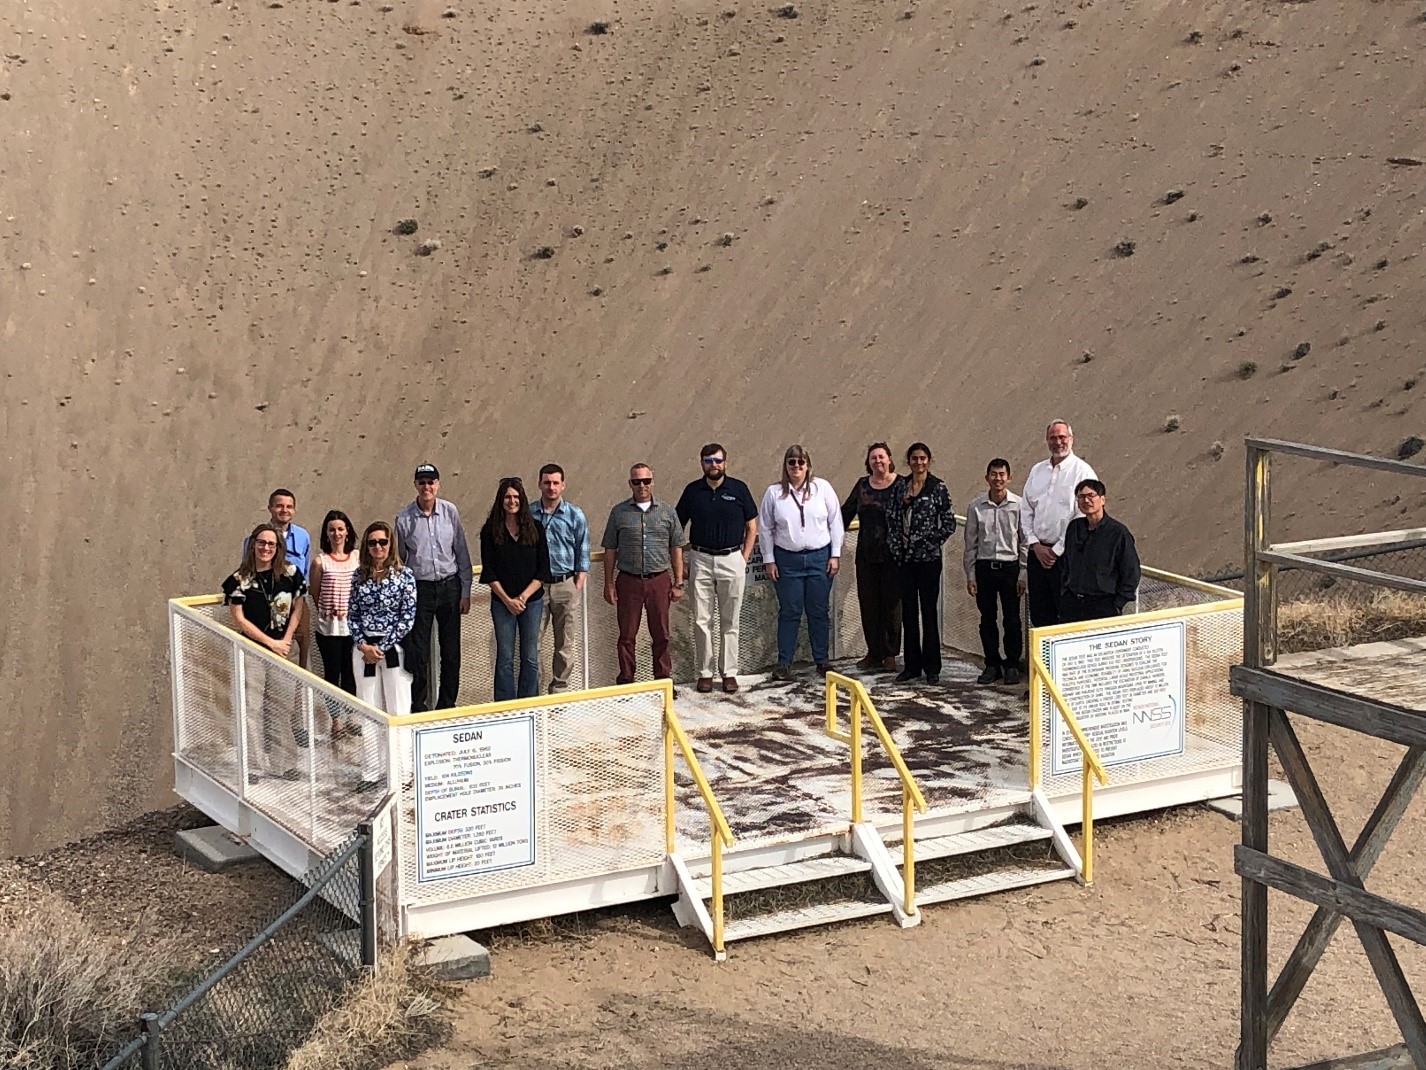 LANL managers visit the Sedan Crater, formed as a result of the Sedan nuclear test conducted in July 1962. Left to right: Stacy Mclaughlin, AMPP-DO; Alexei Klimenko, ISR-1; Suzanne Nowicki, ISR-1; Stephanie Archuleta, DESH-DO; Mark Chadwick, ALDX; Kim Obrey, MST-8; Cory Johnson, A-3; Charles Kelsey, P-27; Jeff Pietryga, C-IIAC; Morag Smith, NEN-3; Michelle Silva, NEN-3; Gowri Srinivasan, XCP-8; Jimmy Fung, XCP-1; Pat Fitch, ALDCELS; and Michael Cai, ISR-DO.